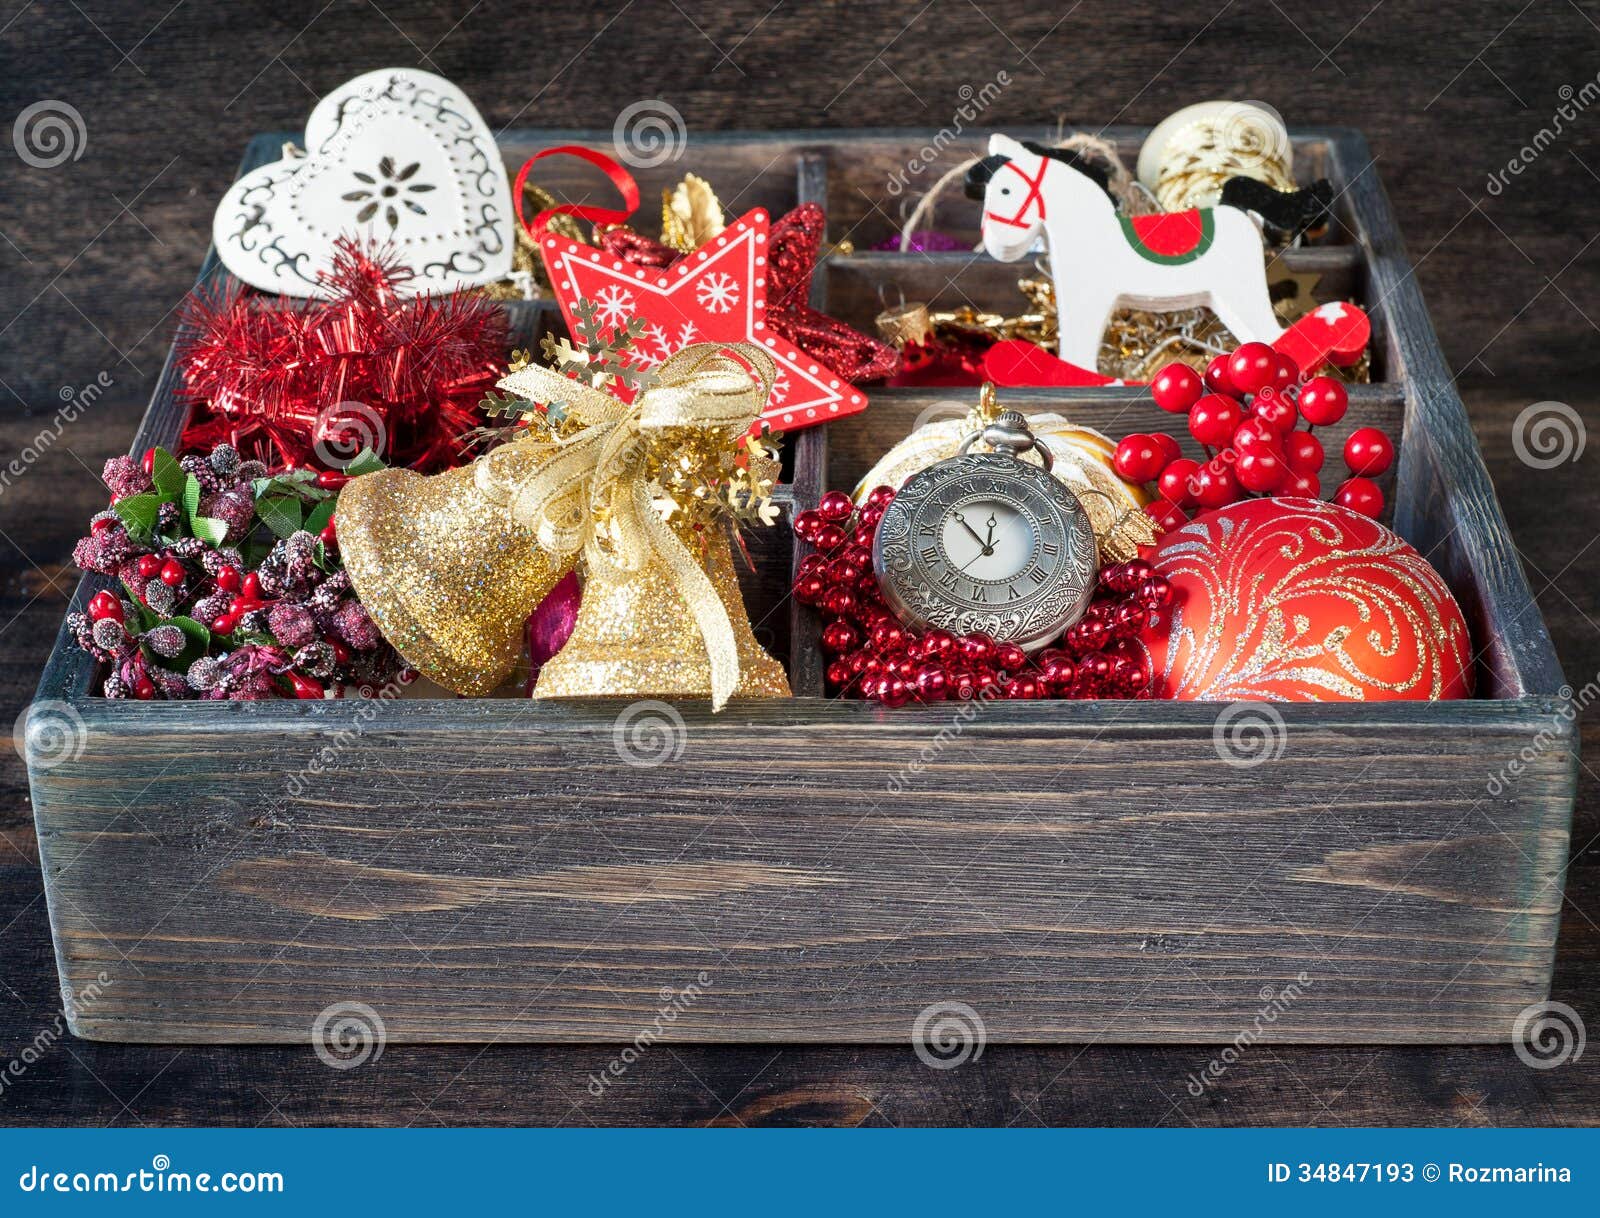 Wooden Box With Christmas Toys And Decorations Stock Photos - Image 